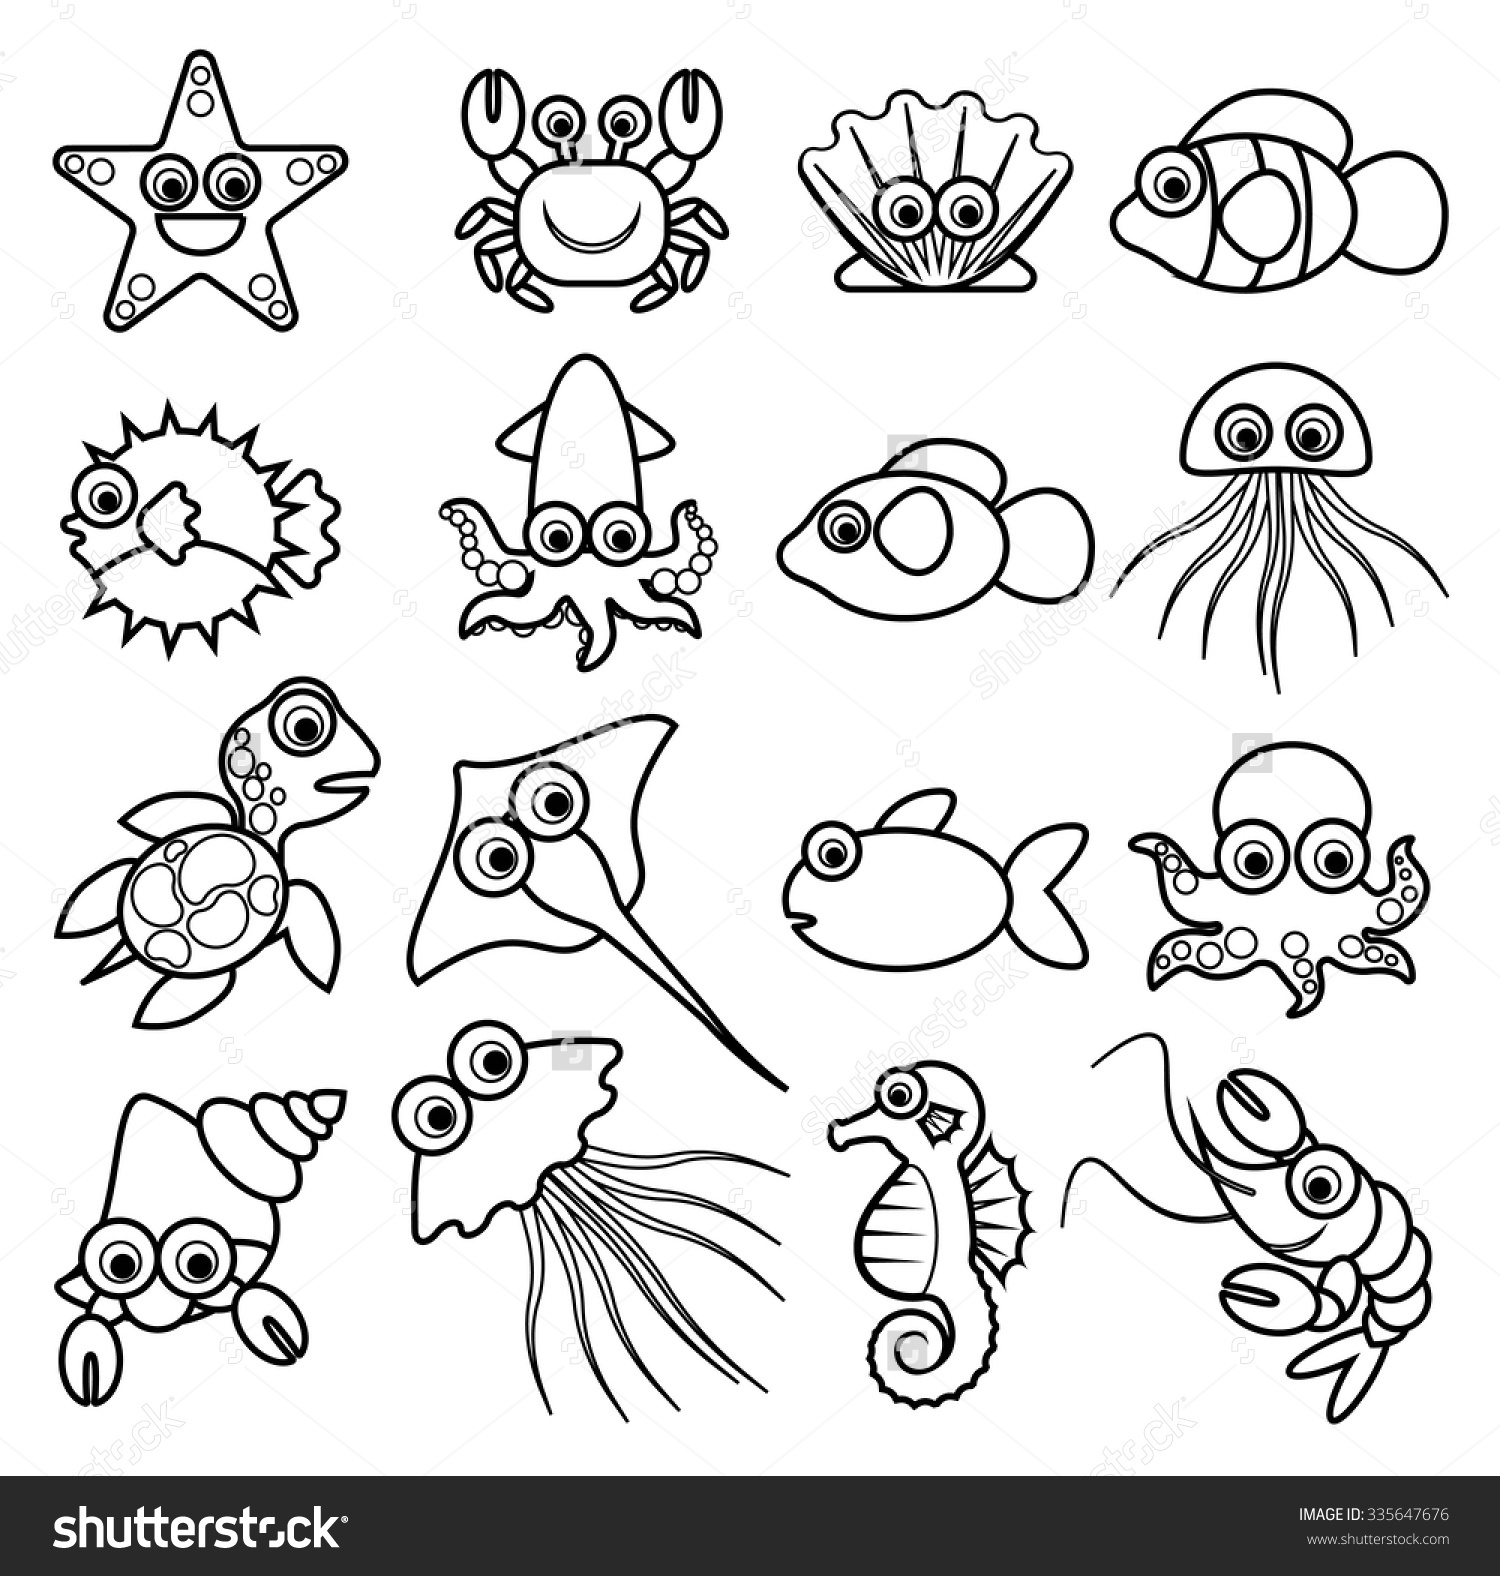 Sea Creatures Drawings Easy : How To Draw Cute Cartoon Sea Creatures ...